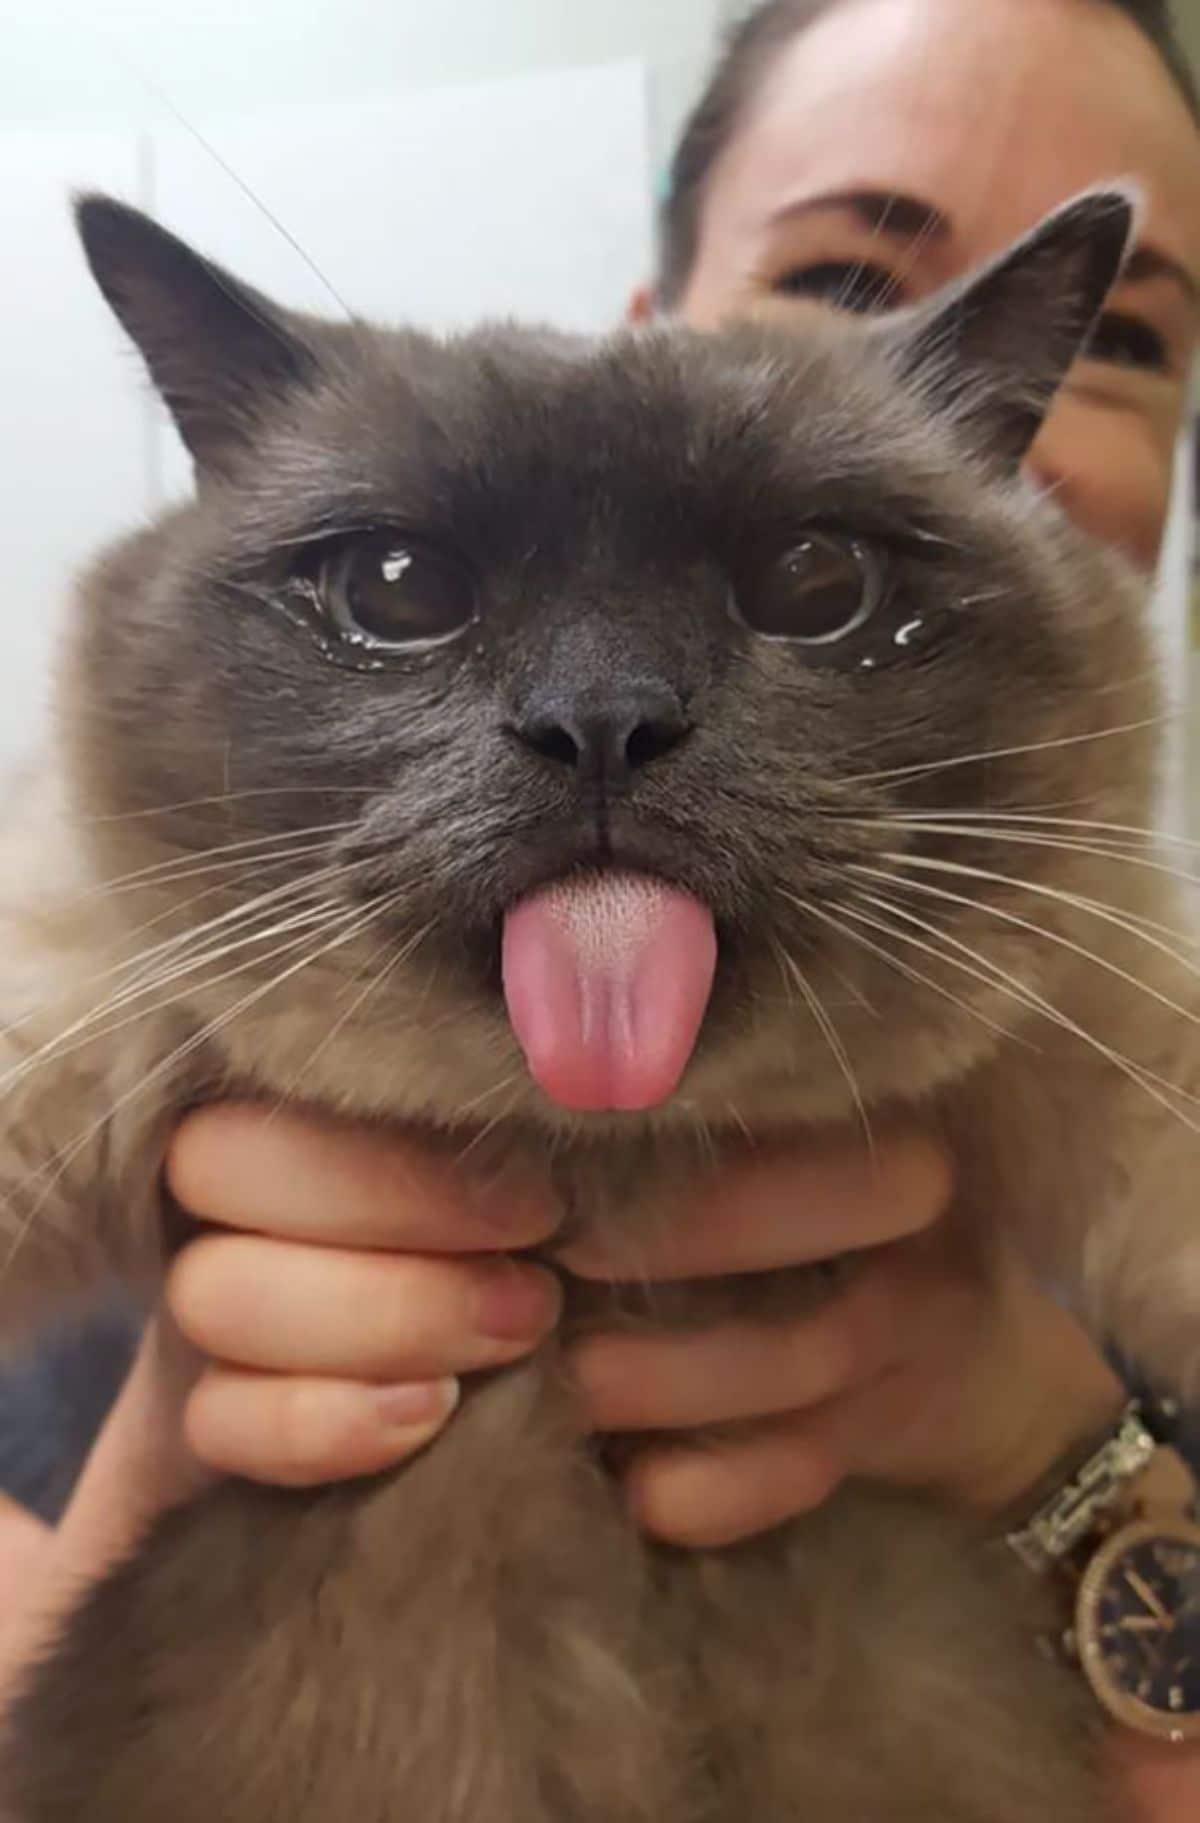 brown cat with tongue sticking out being held up by someone